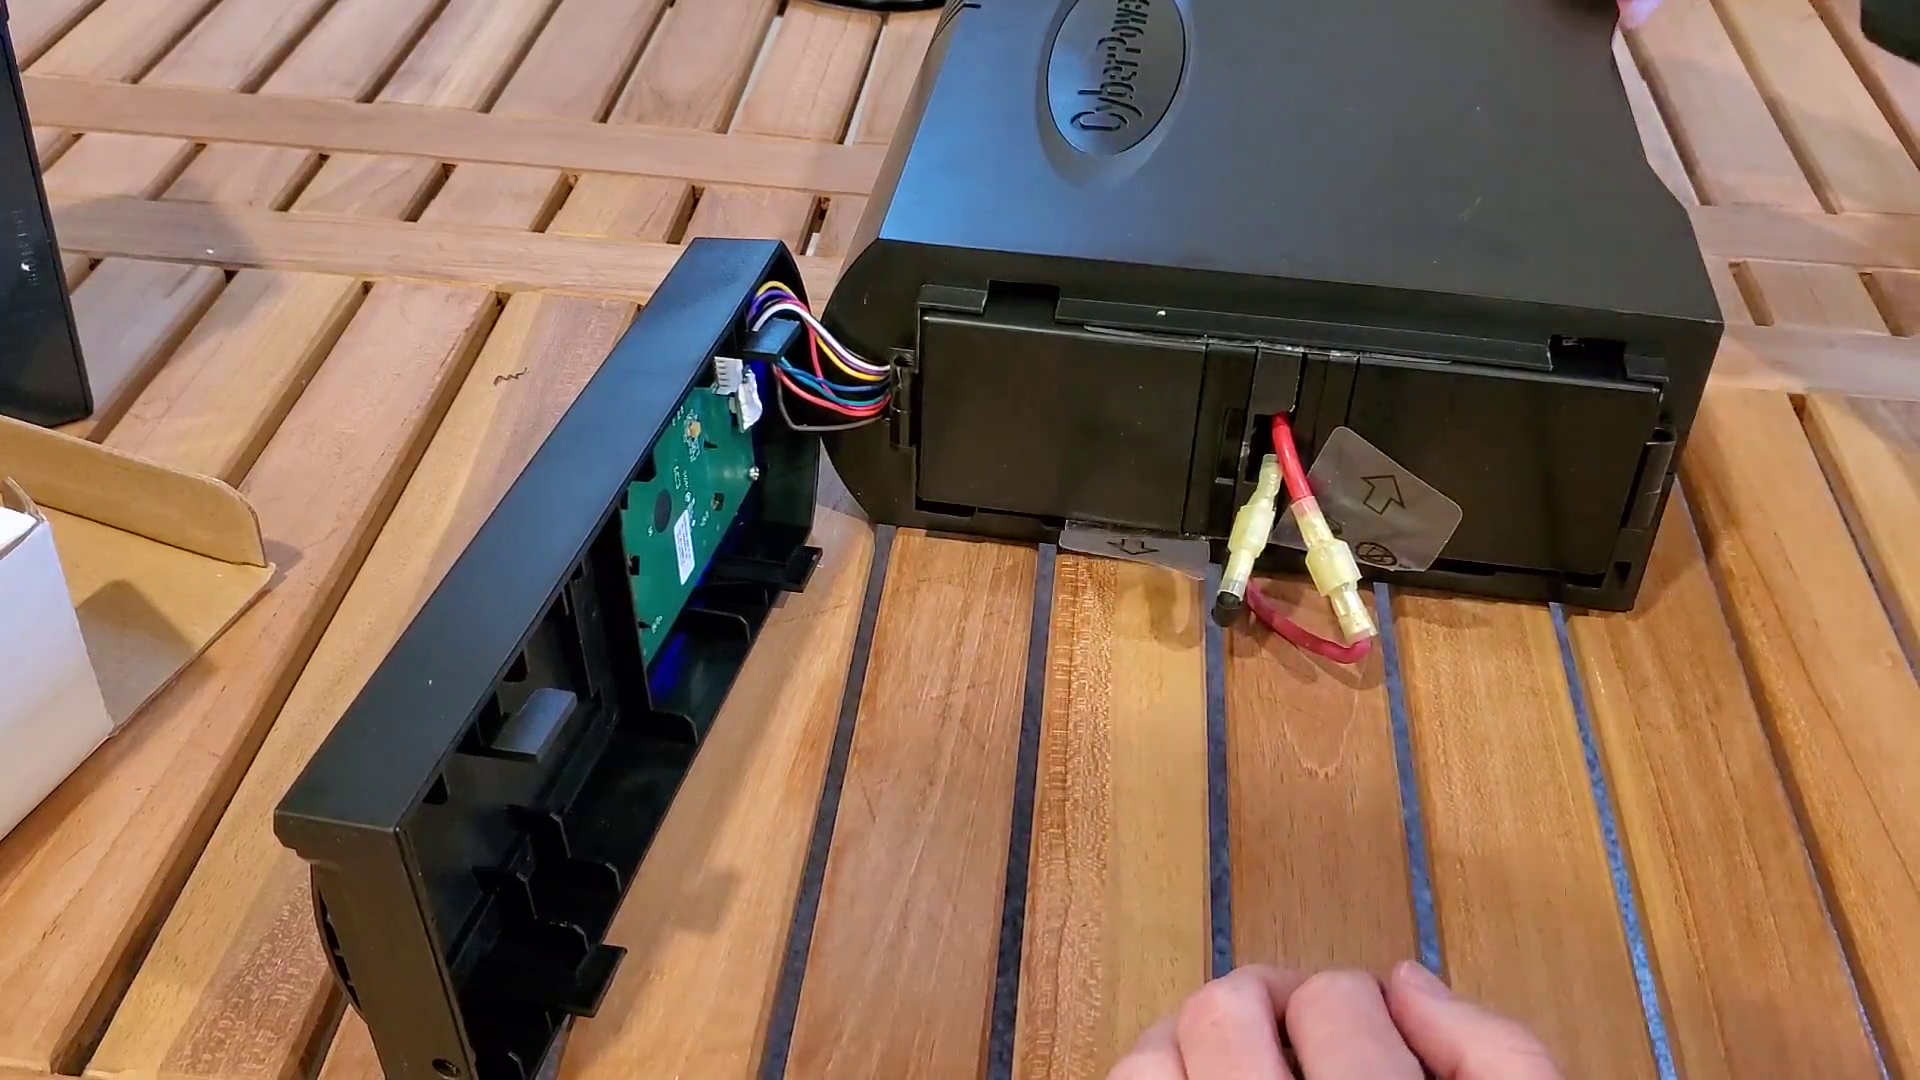 showing the new batteries installed and wires reconnected, part of the How to Replace a CyberPower 1500AV UPS Battery article